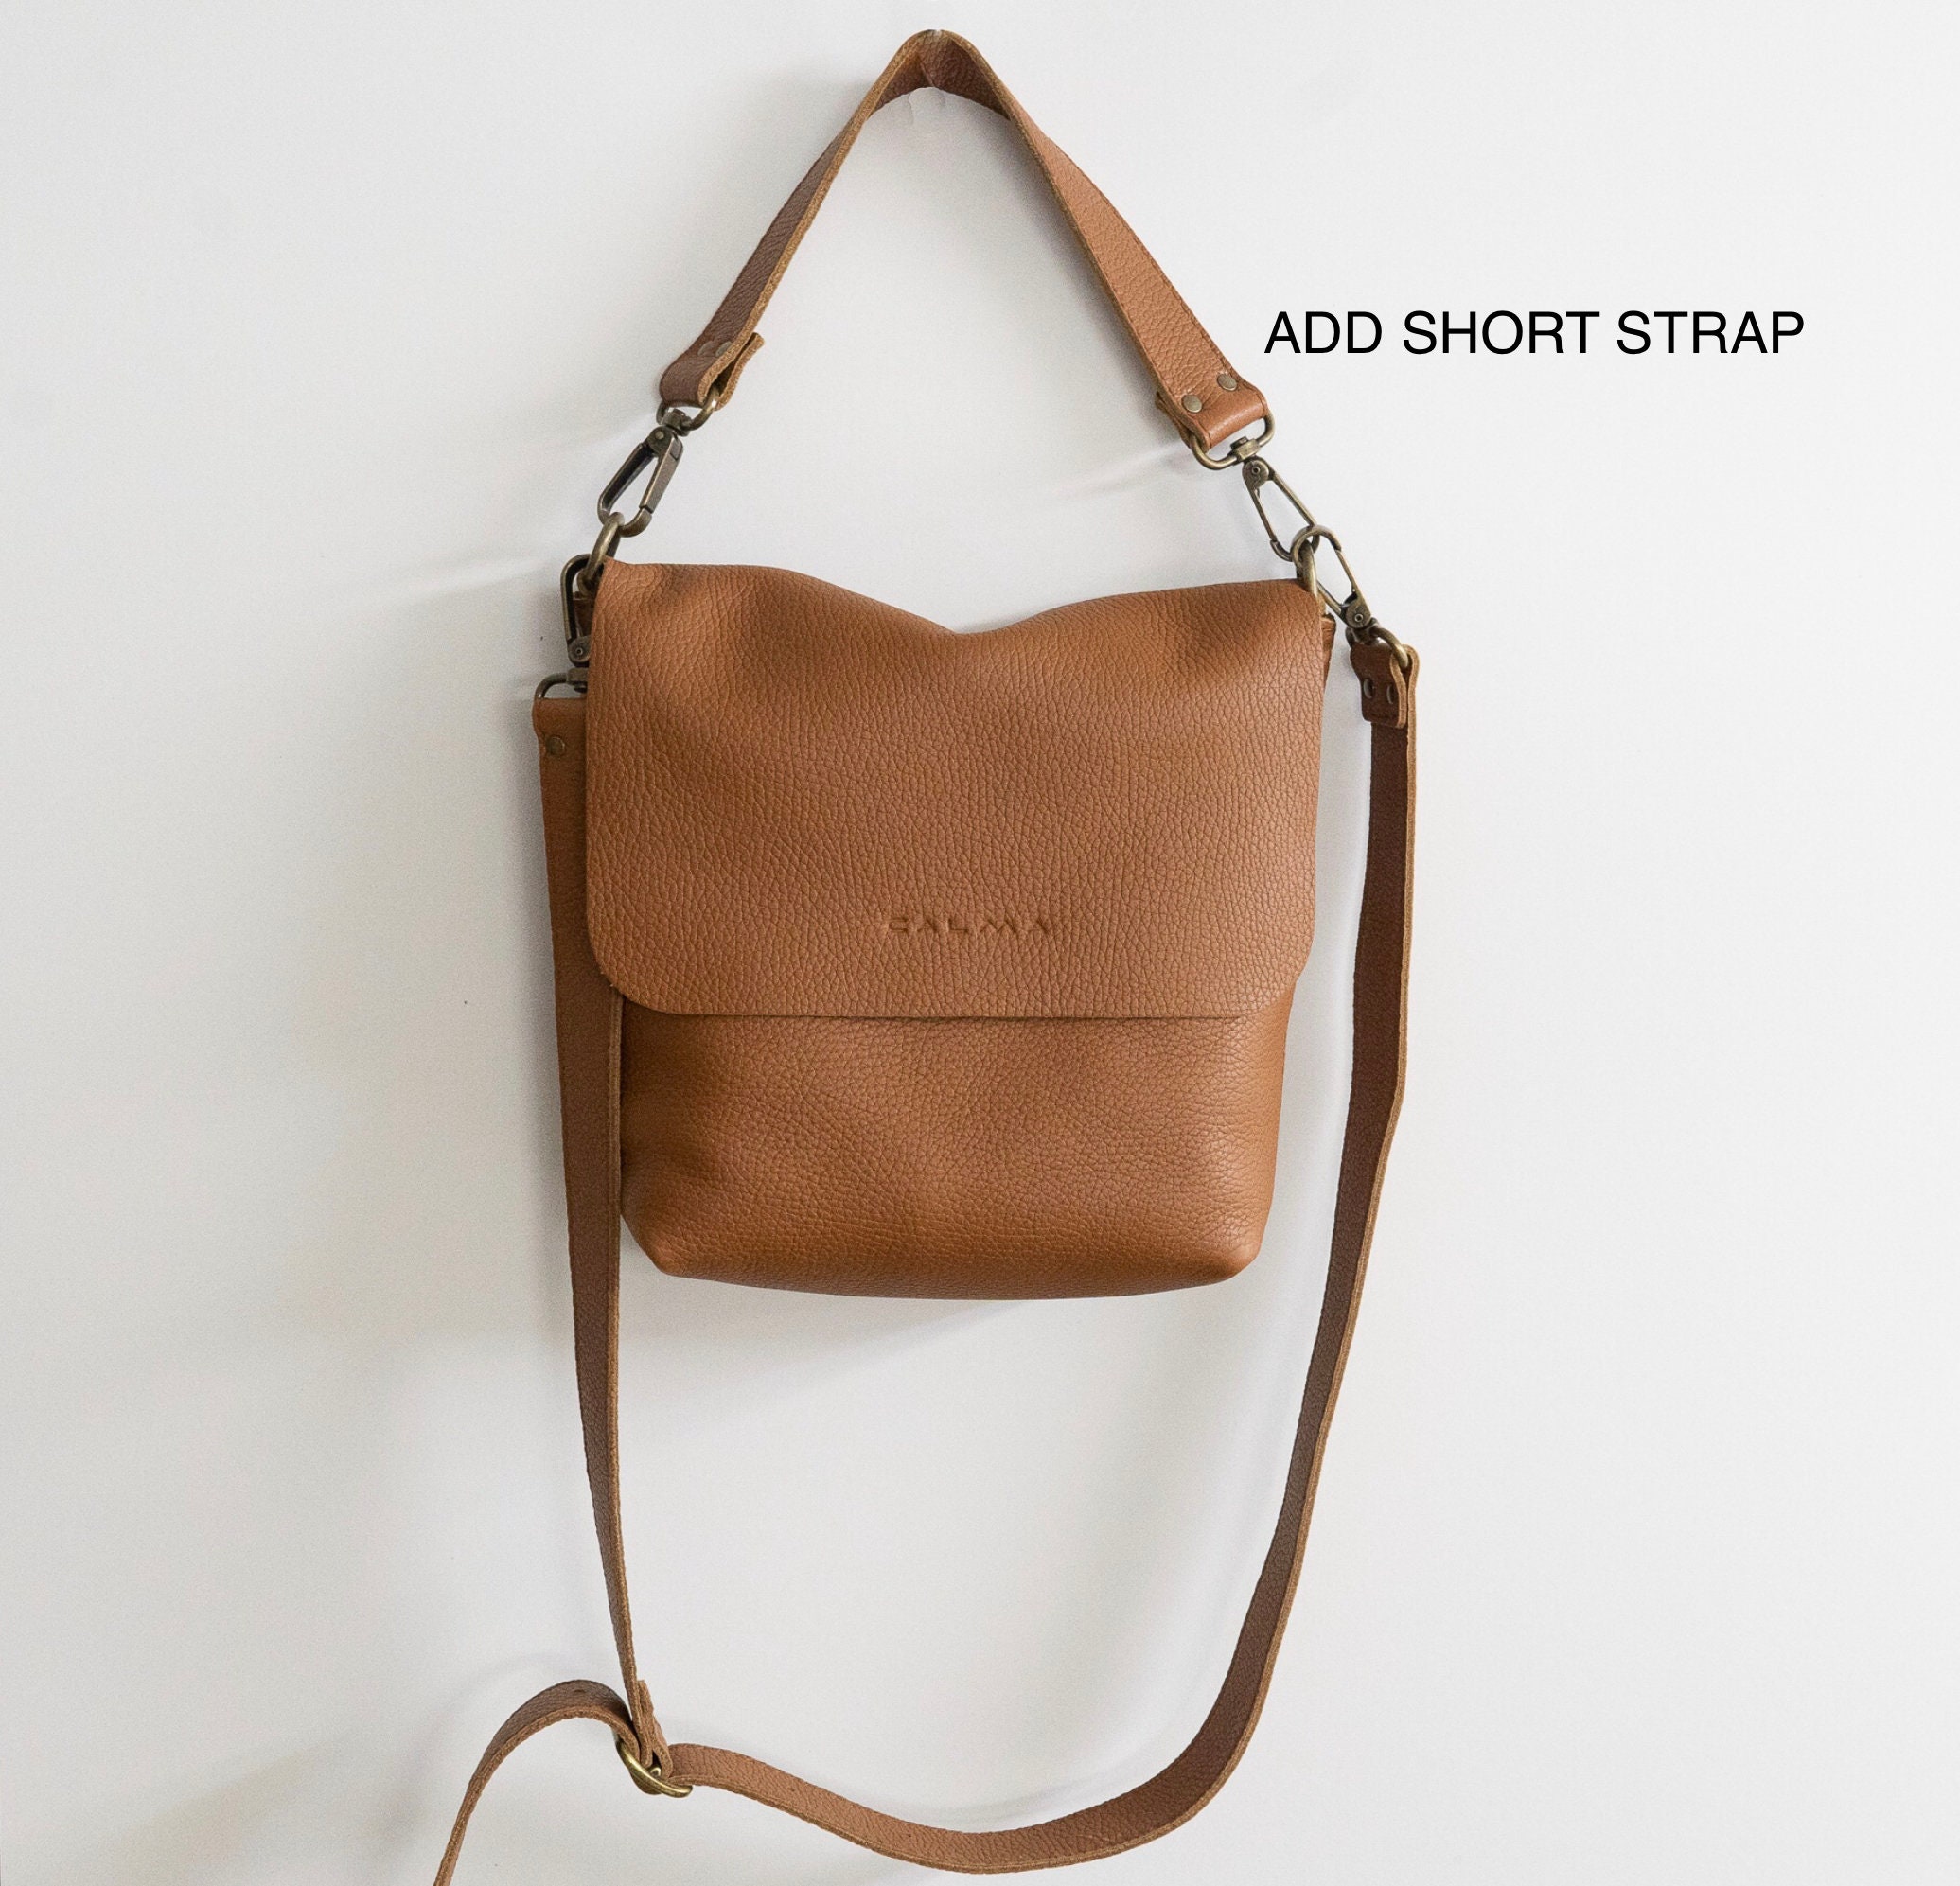 How to rock a bag strap + my fav crossbody bags – Edit by Lauren